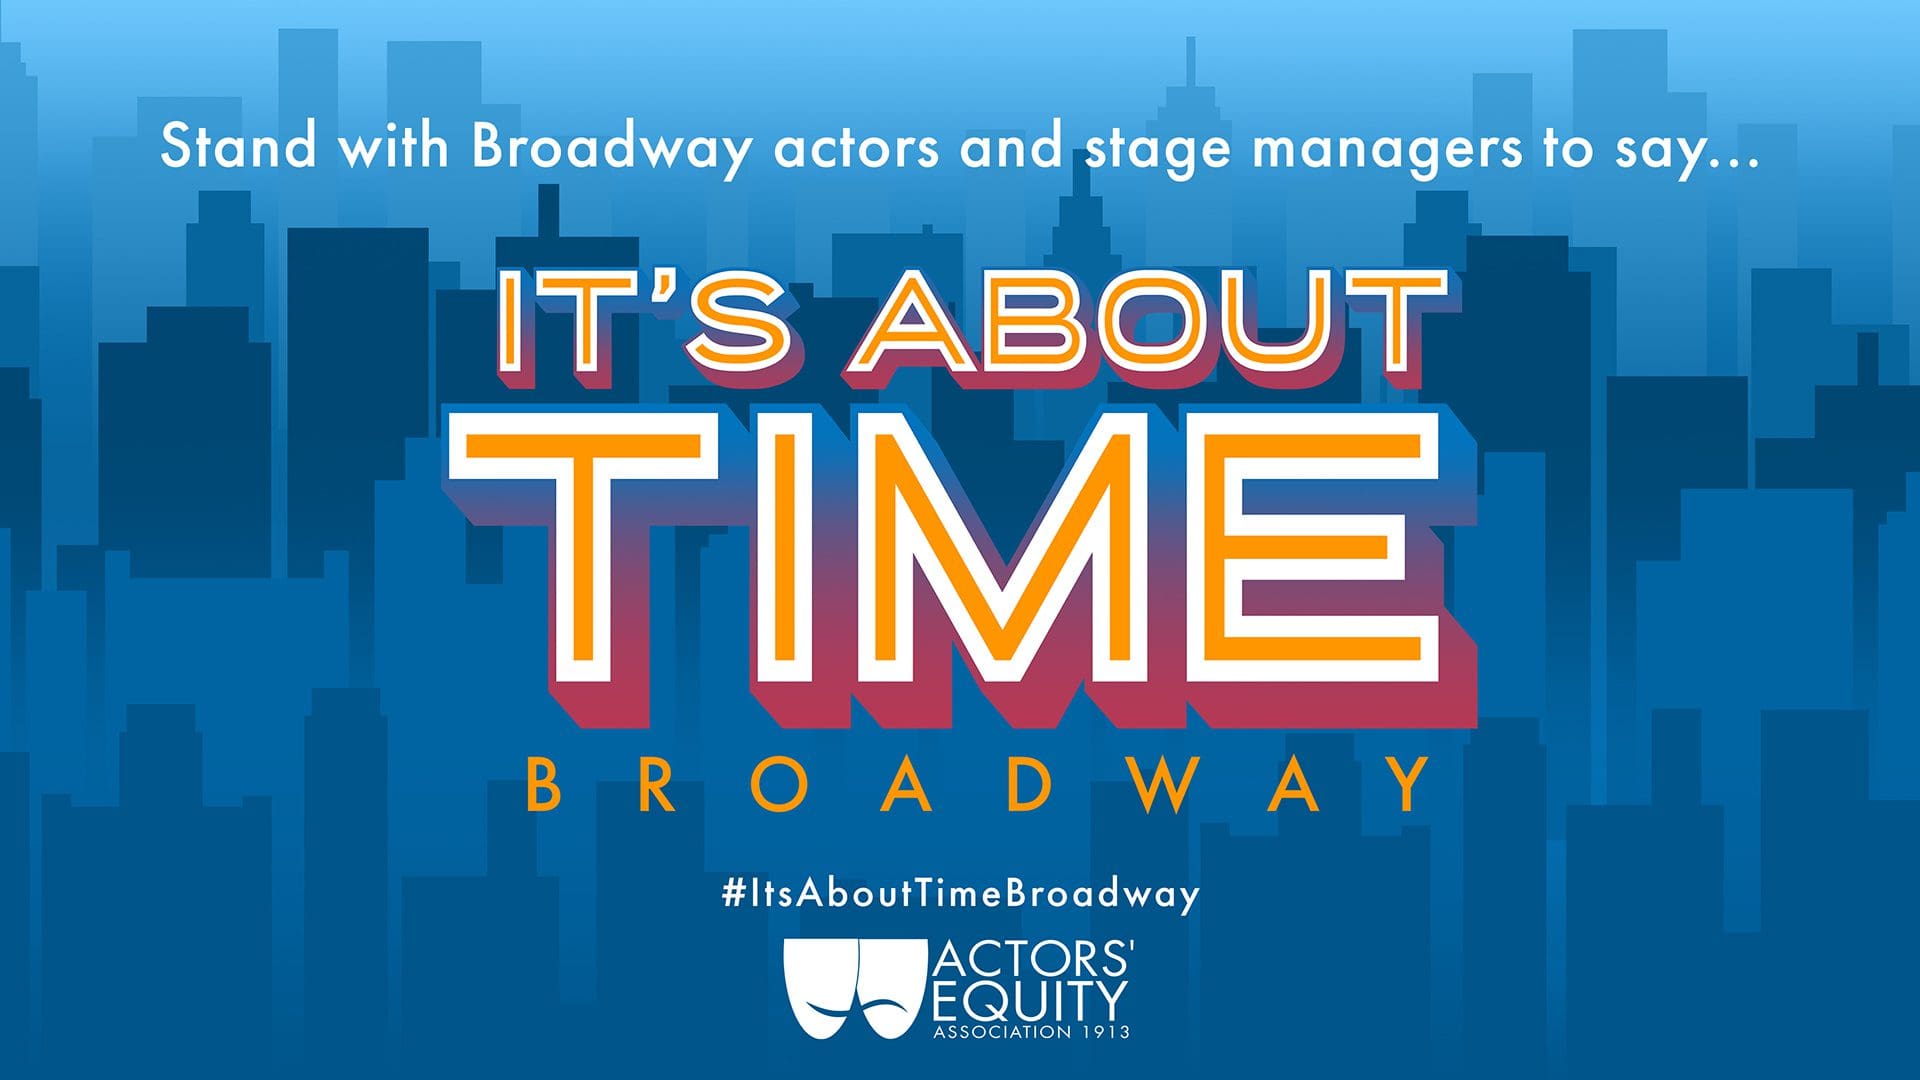 Stand with Broadway actors